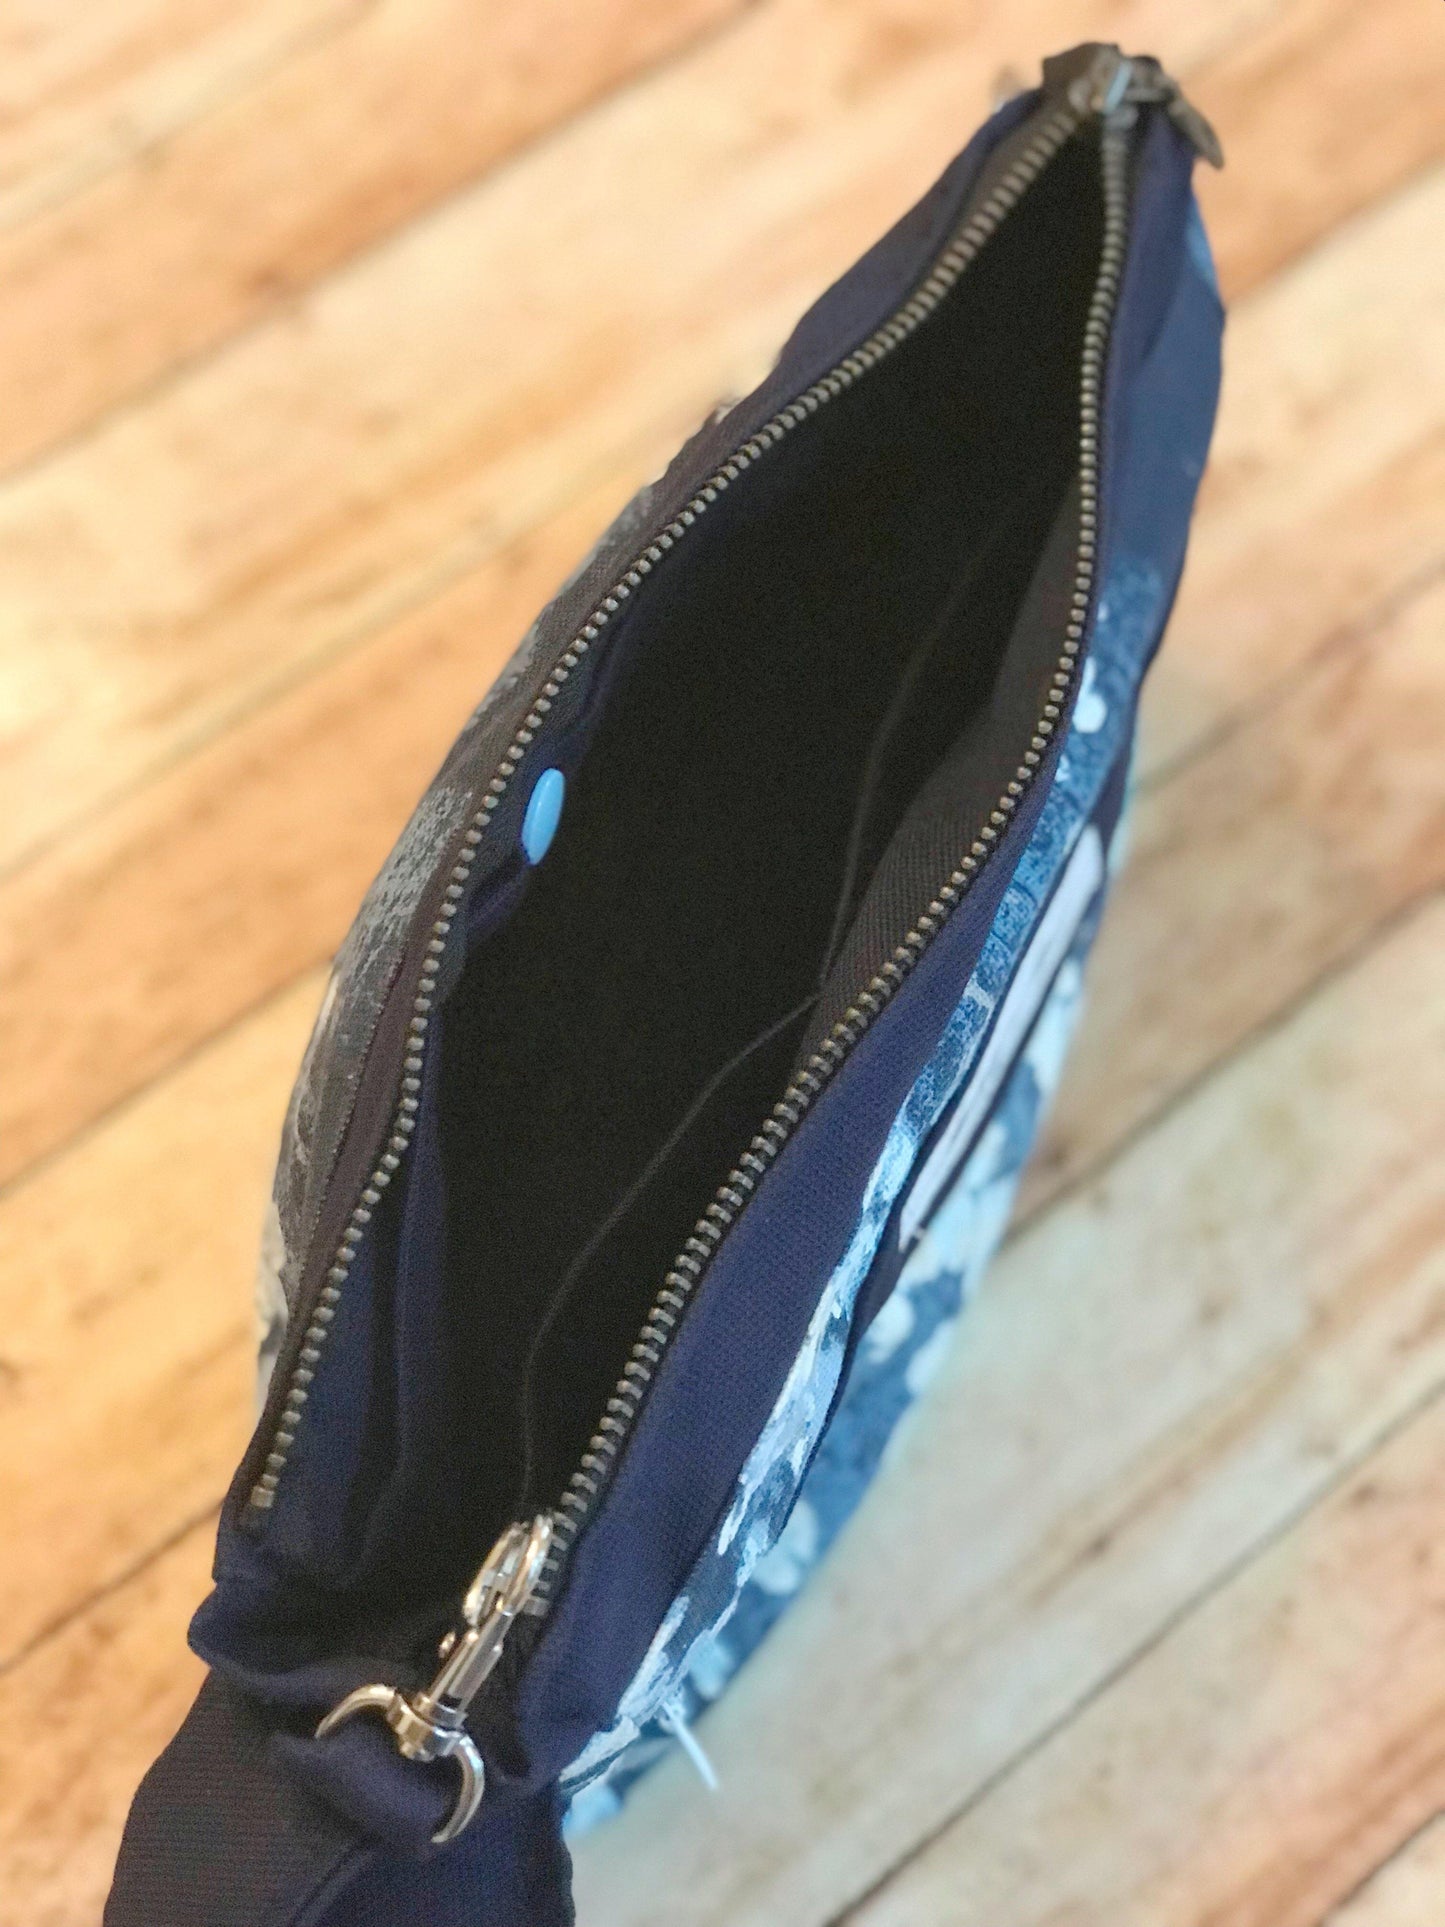 Inside view of blue teal floral wristlet, showing a divided pocket on one side & snap pocket on the other